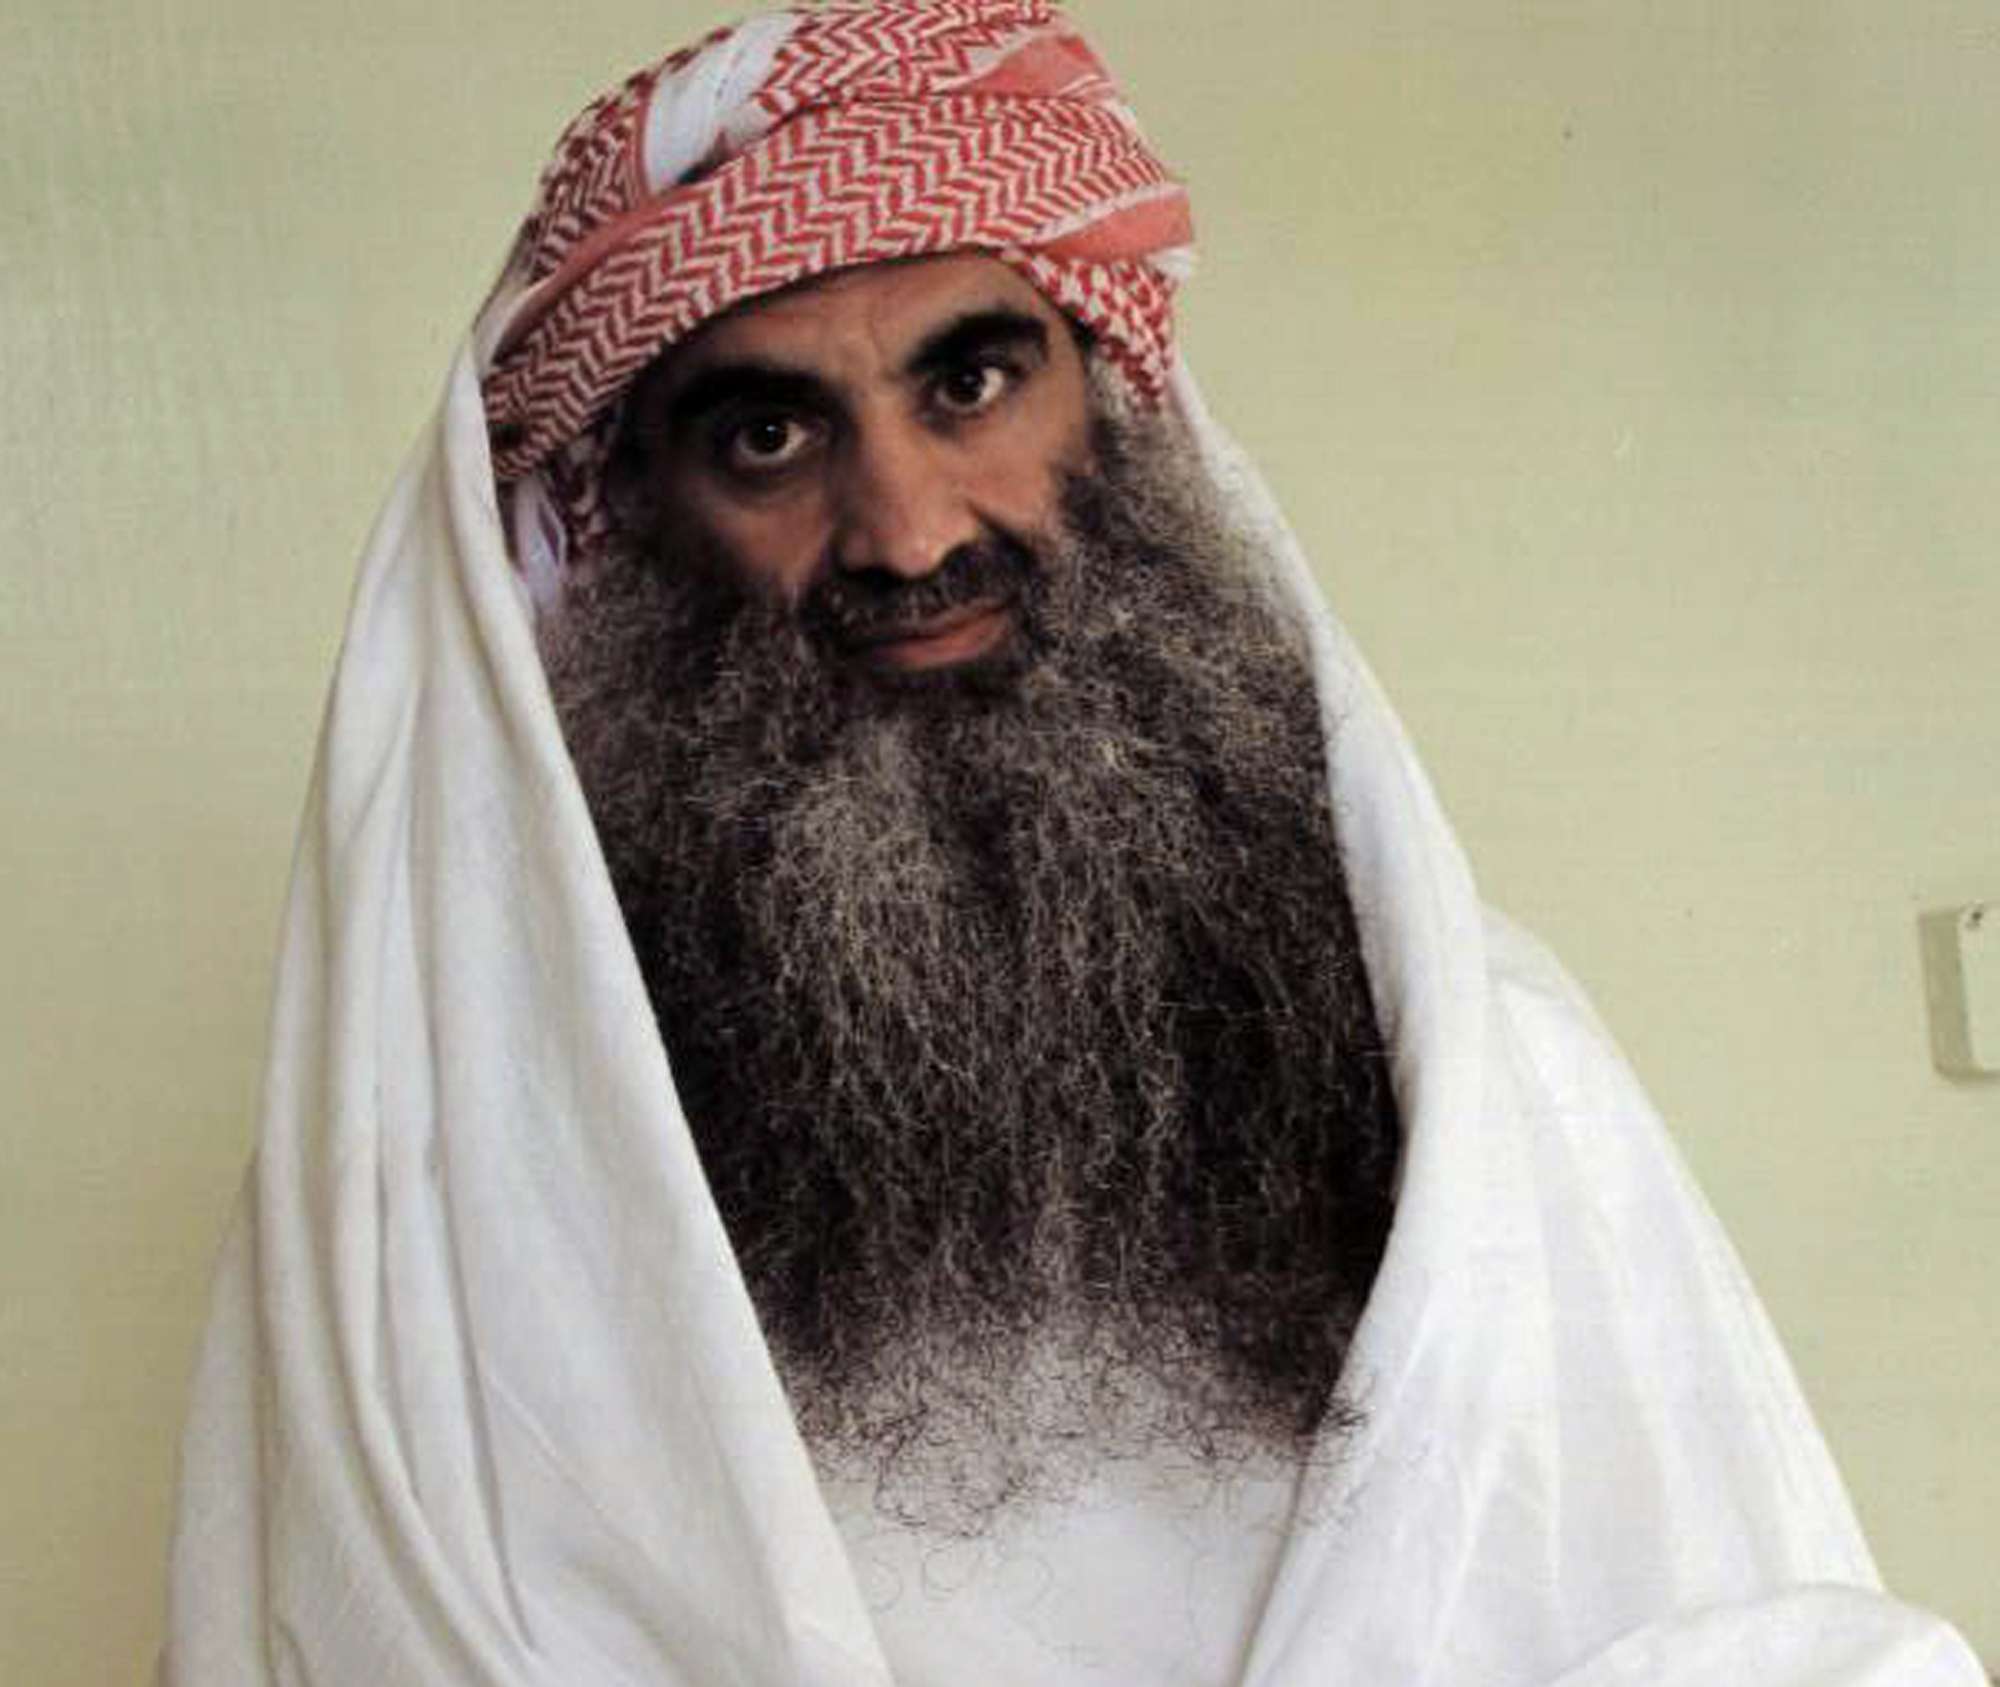 This undated file photo downloaded from the Arabic language Internet site www.muslm.net putports to show Khalid Sheikh Mohammed , the accused mastermind of the September 11 attacks, in detention at Guantanamo Bay. Photo: AP